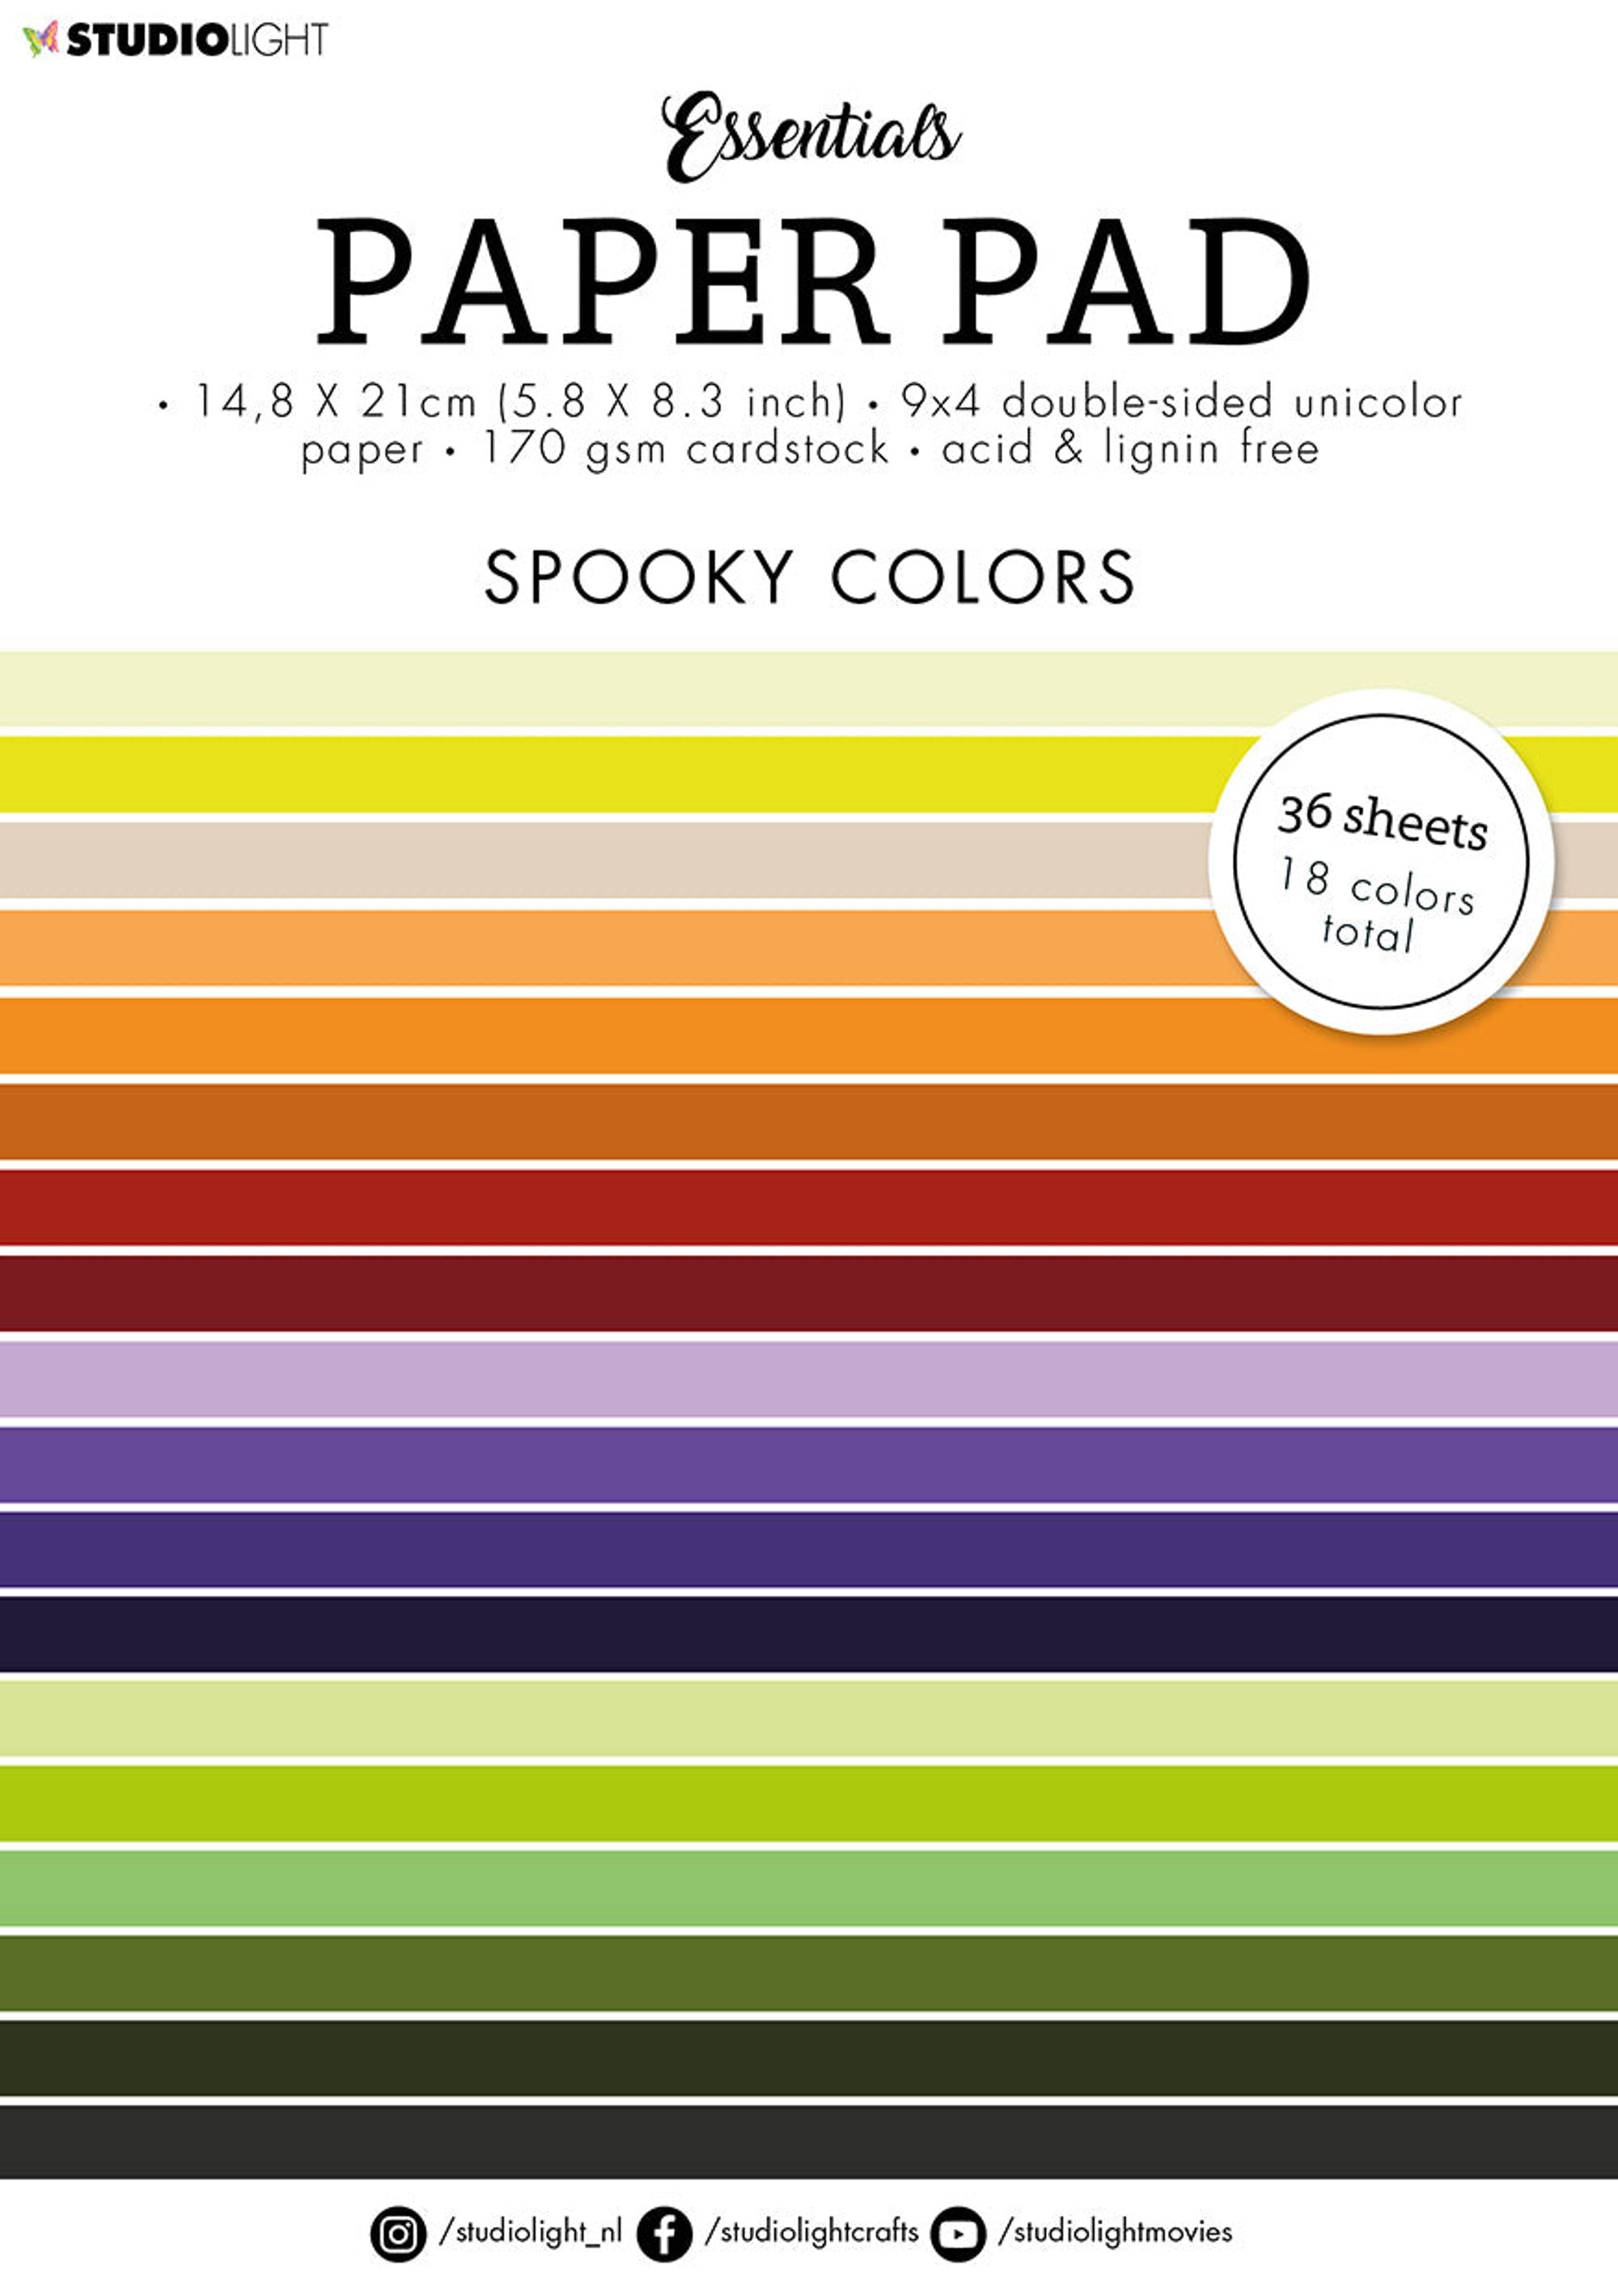 SL Paper Pad Double Sided Unicolor Spooky Colors Essentials 148x210x9mm 36 SH nr.54